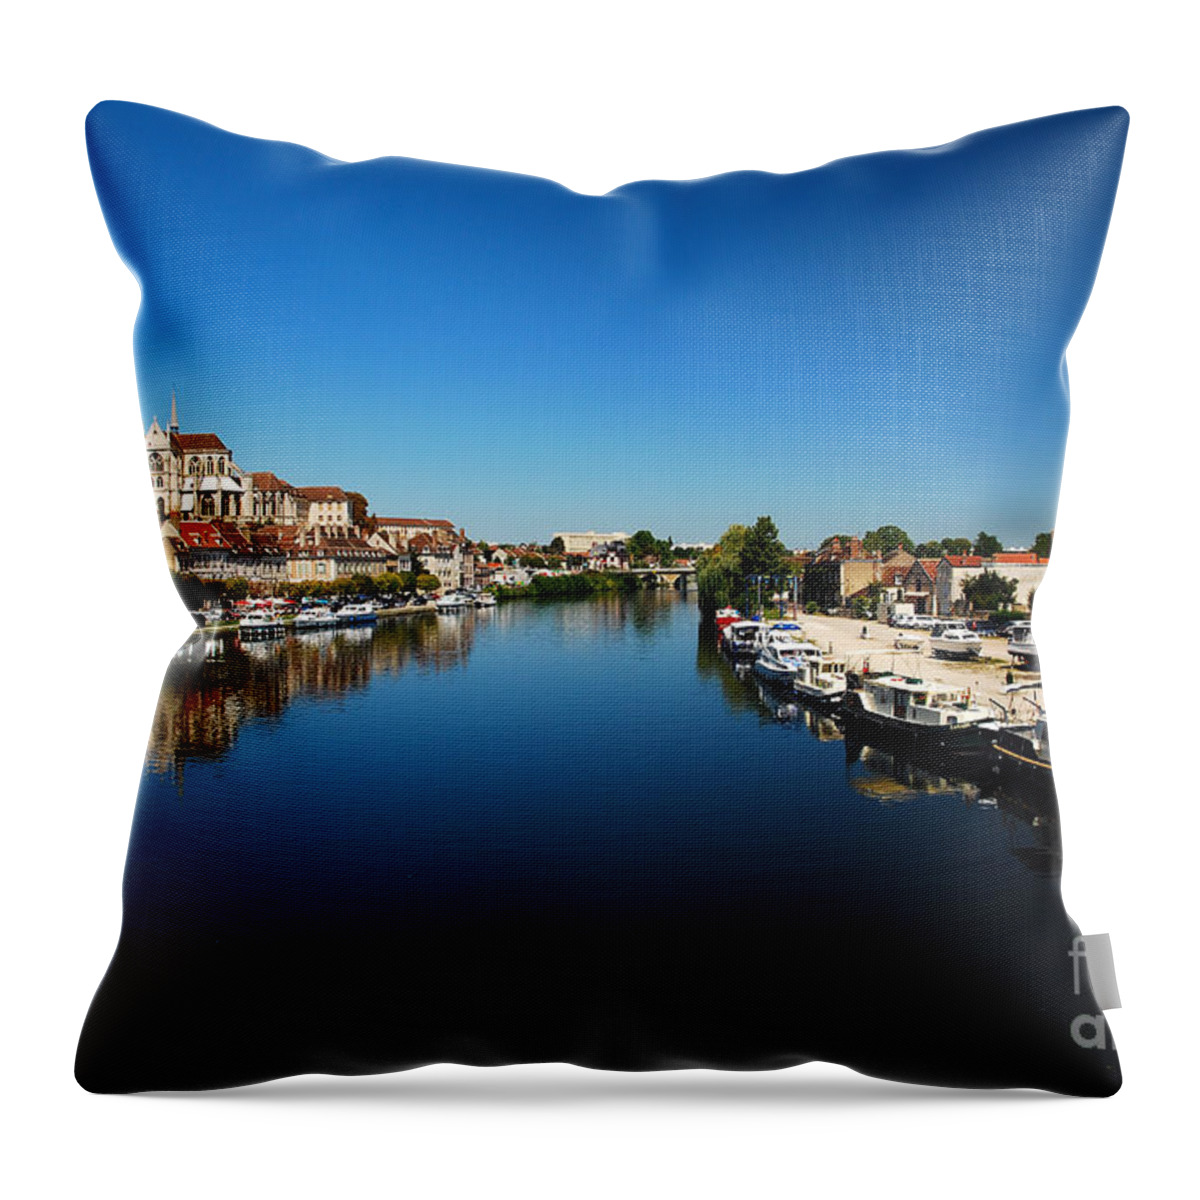 City Throw Pillow featuring the photograph Auxerre France by Hannes Cmarits